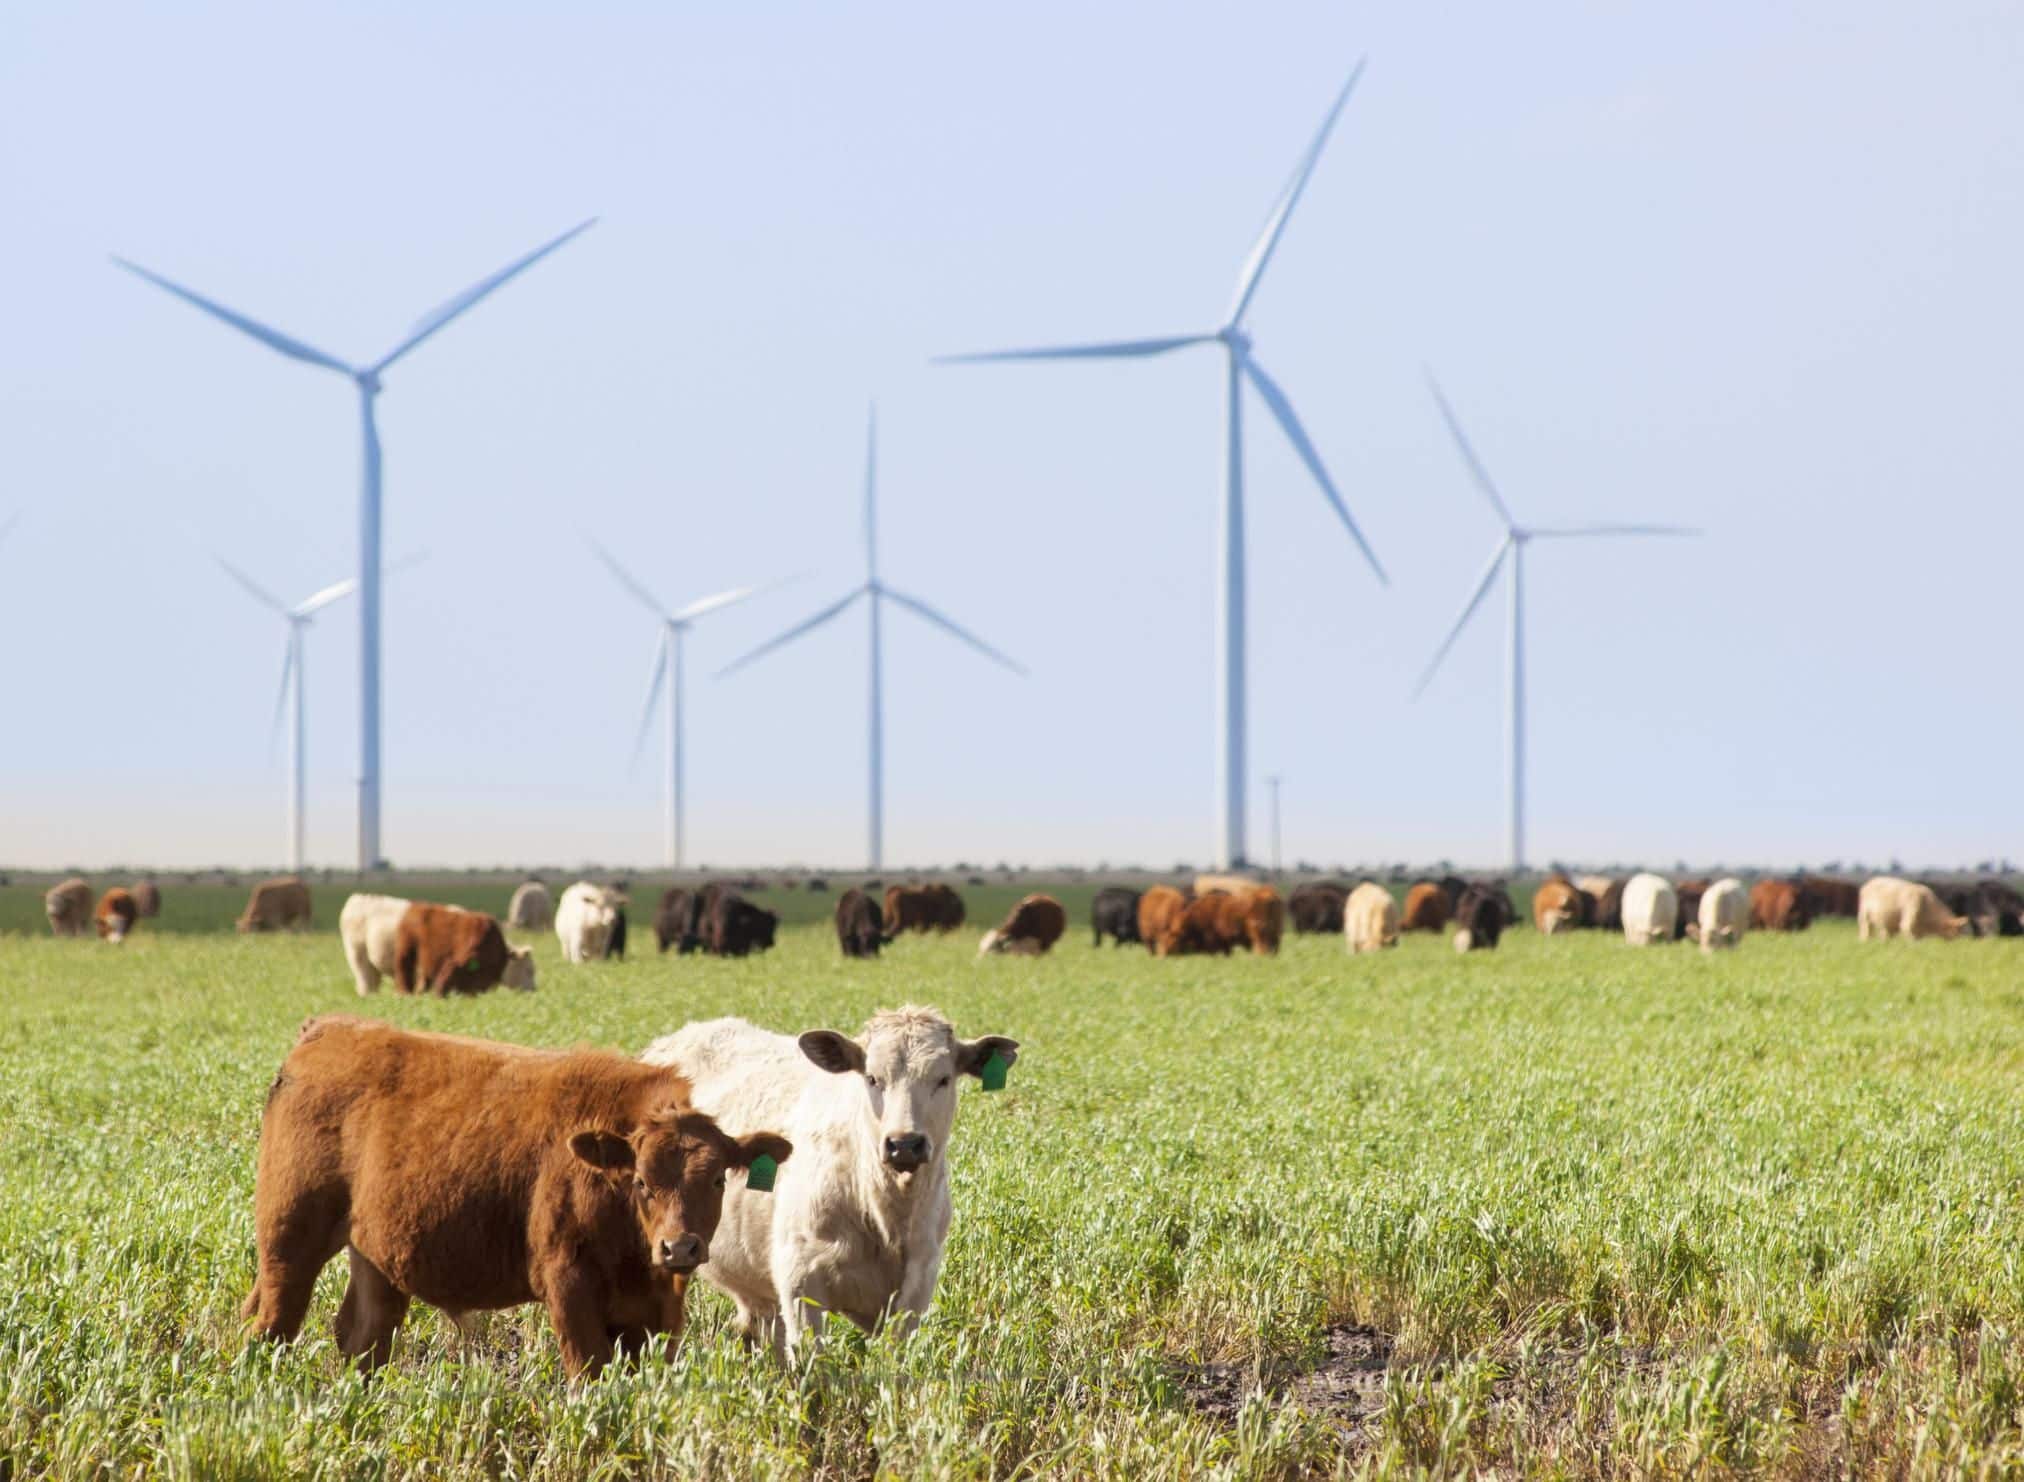  Wind turbines, Texas with cattle in foreground